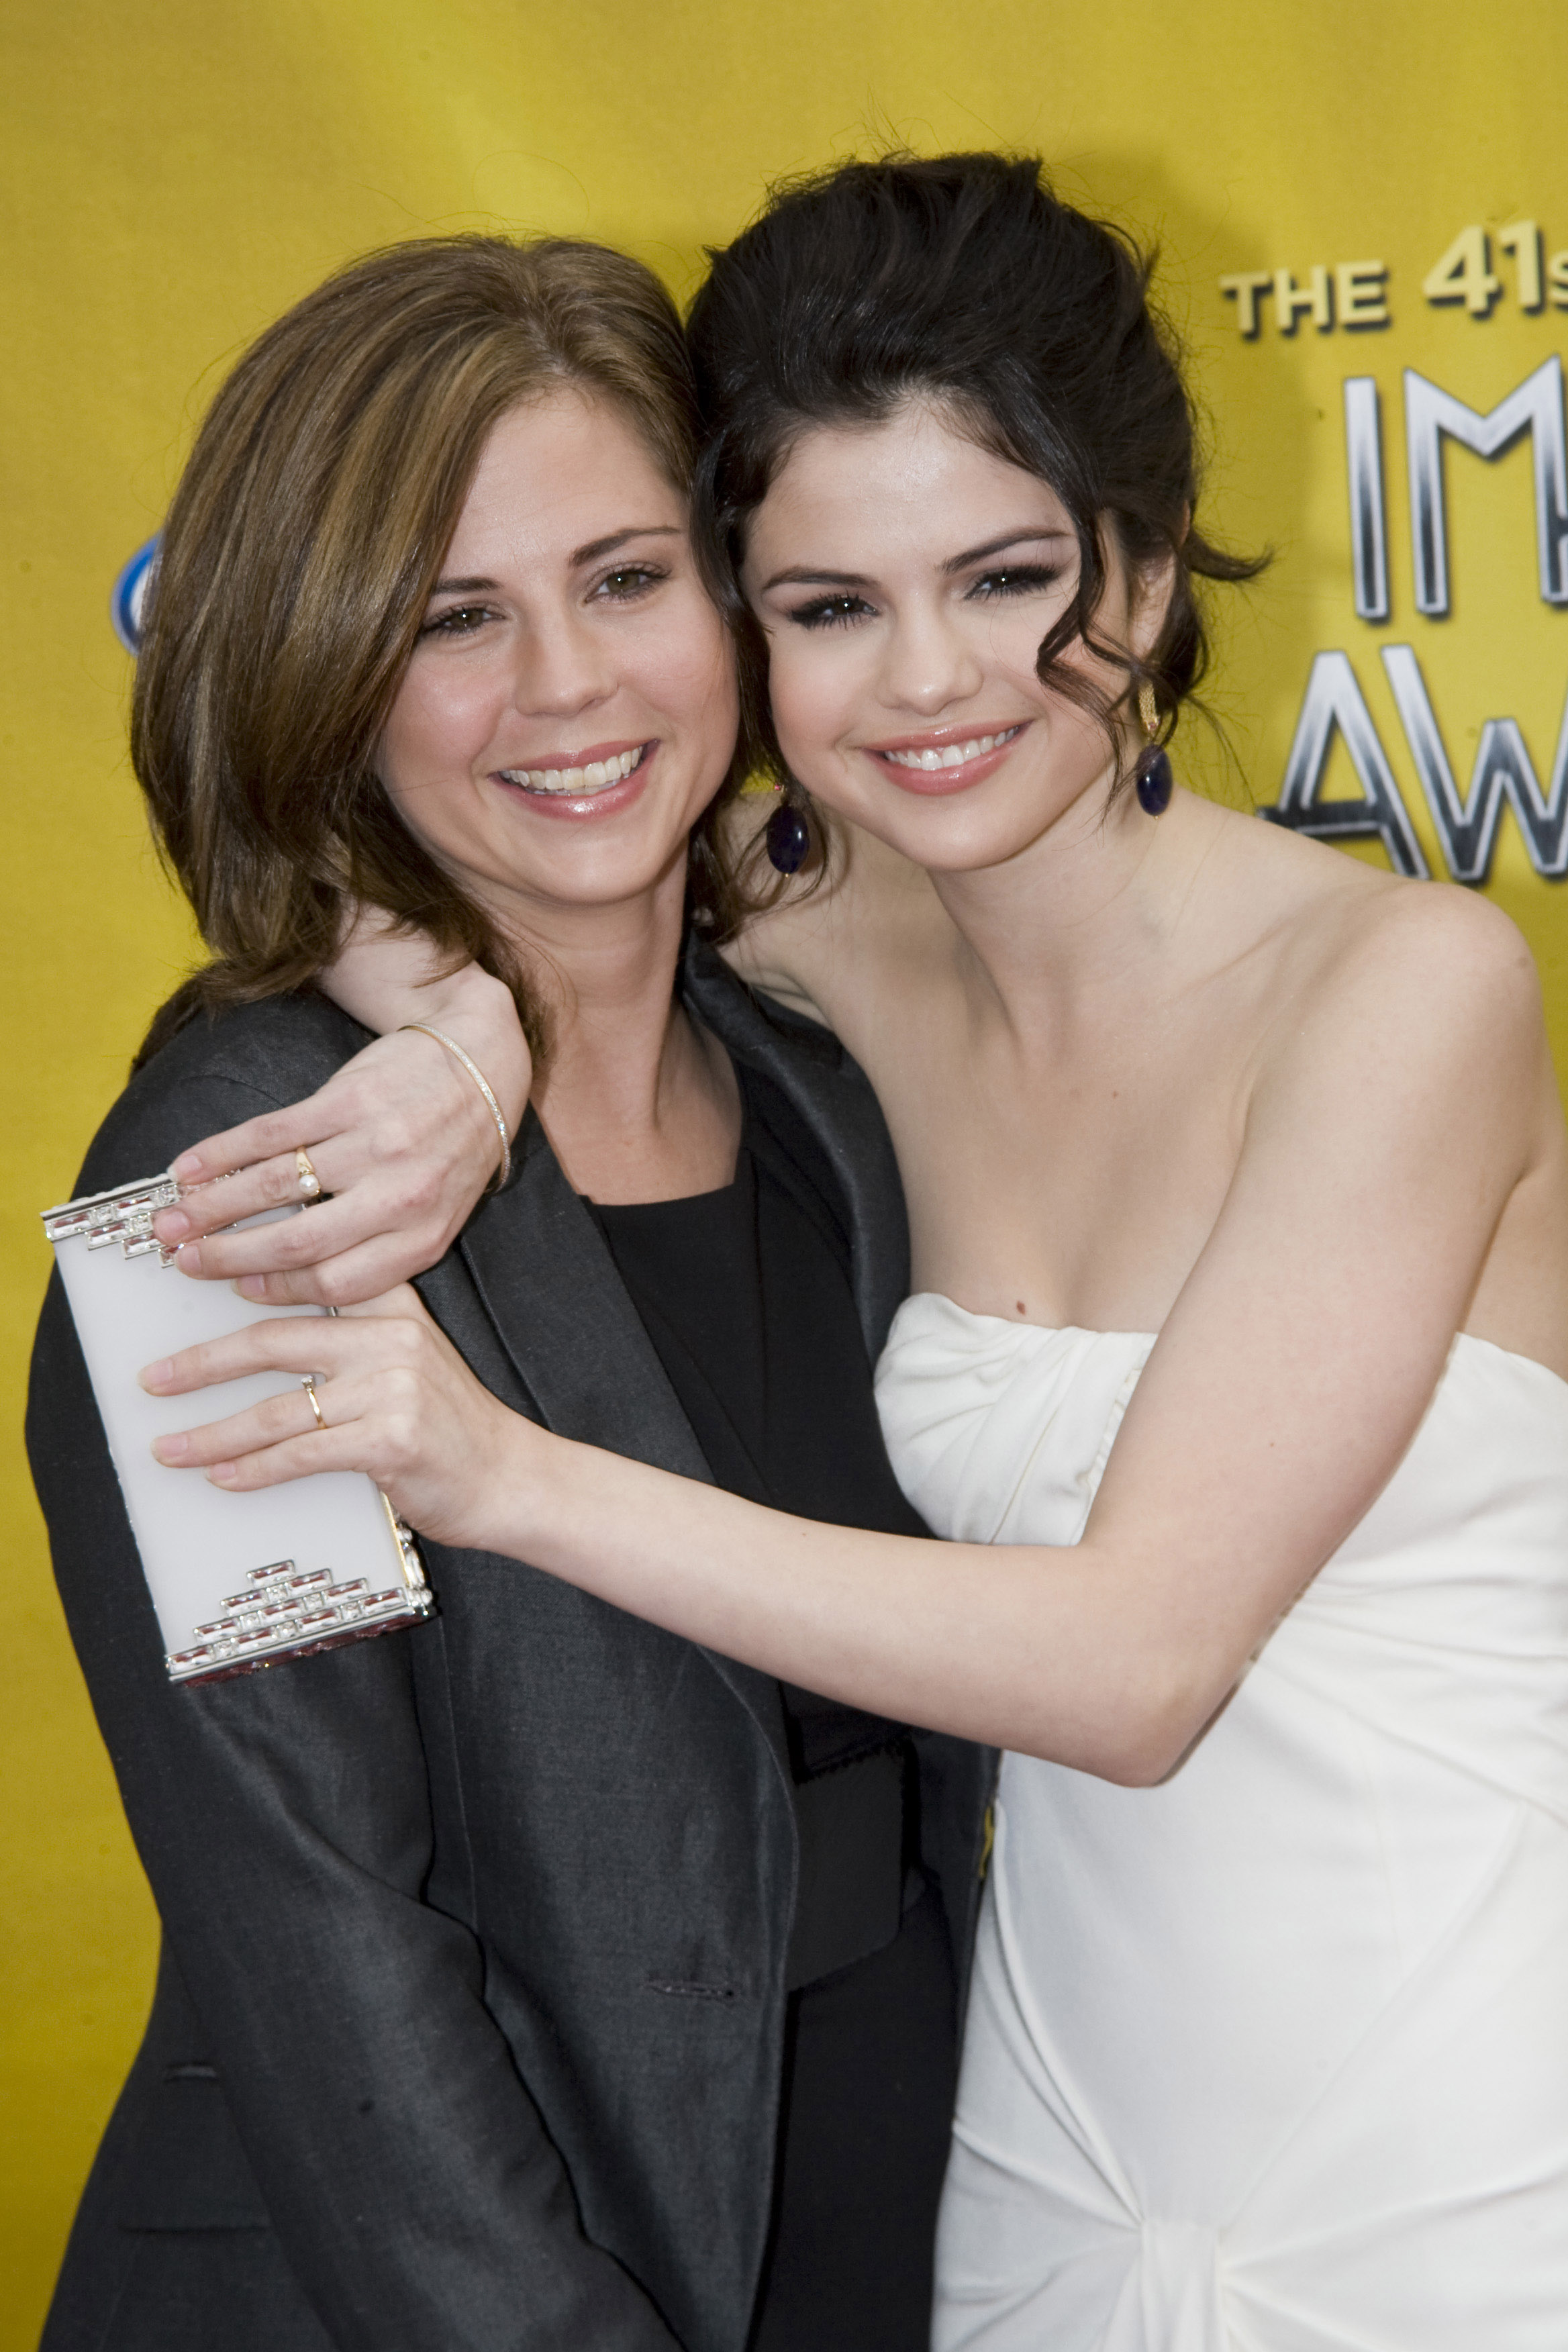 Selena Gomez and her mother Mandy Teefey at The Shrine Auditorium on February 26, 2010, in Los Angeles, California. | Source: Getty Images